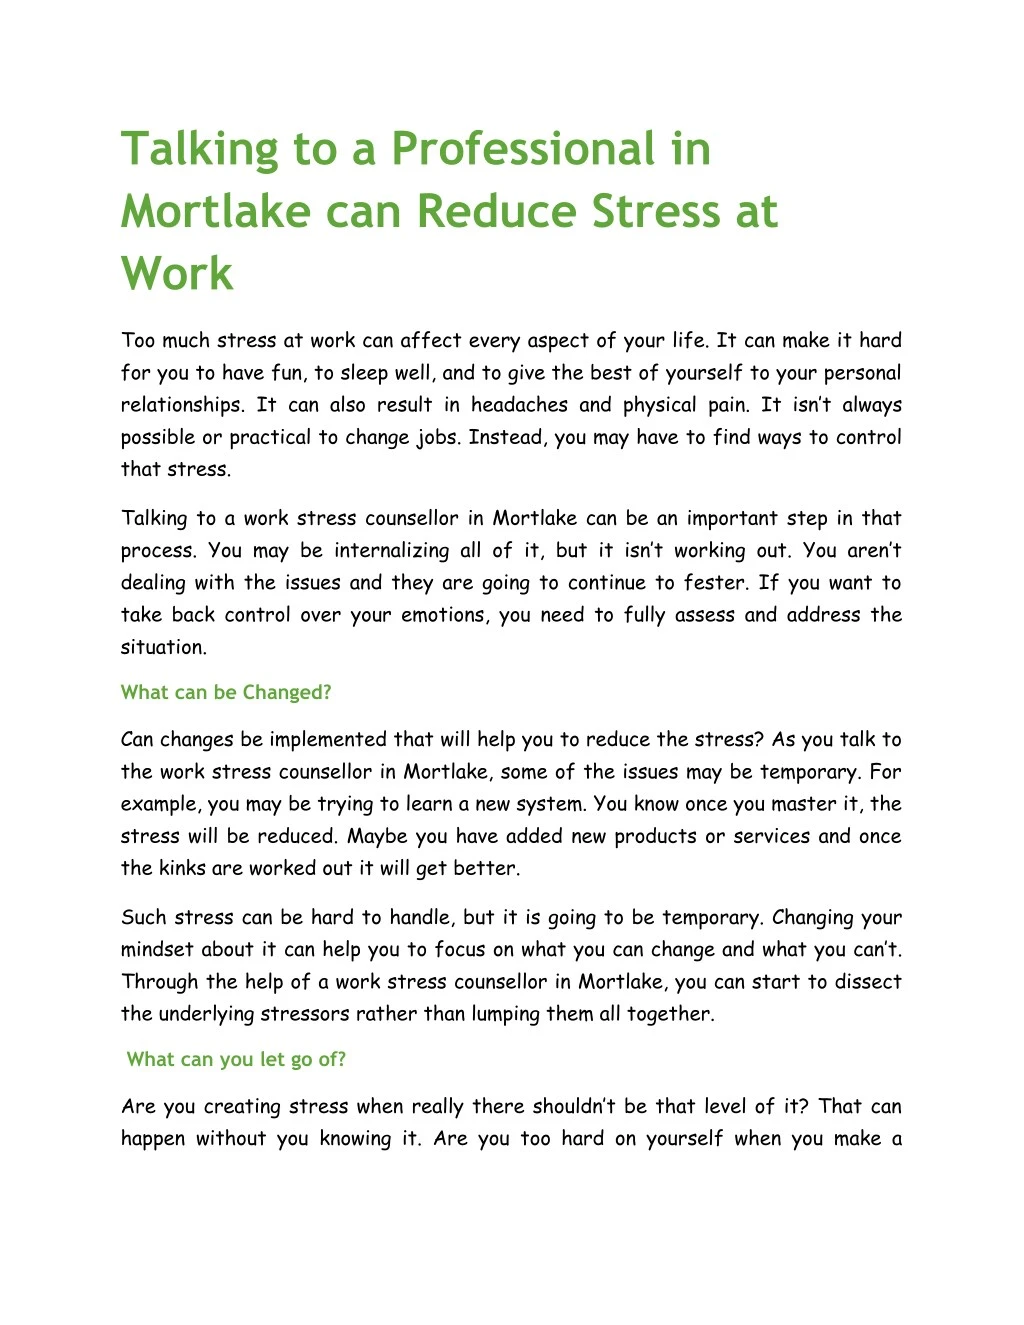 talking to a professional in mortlake can reduce